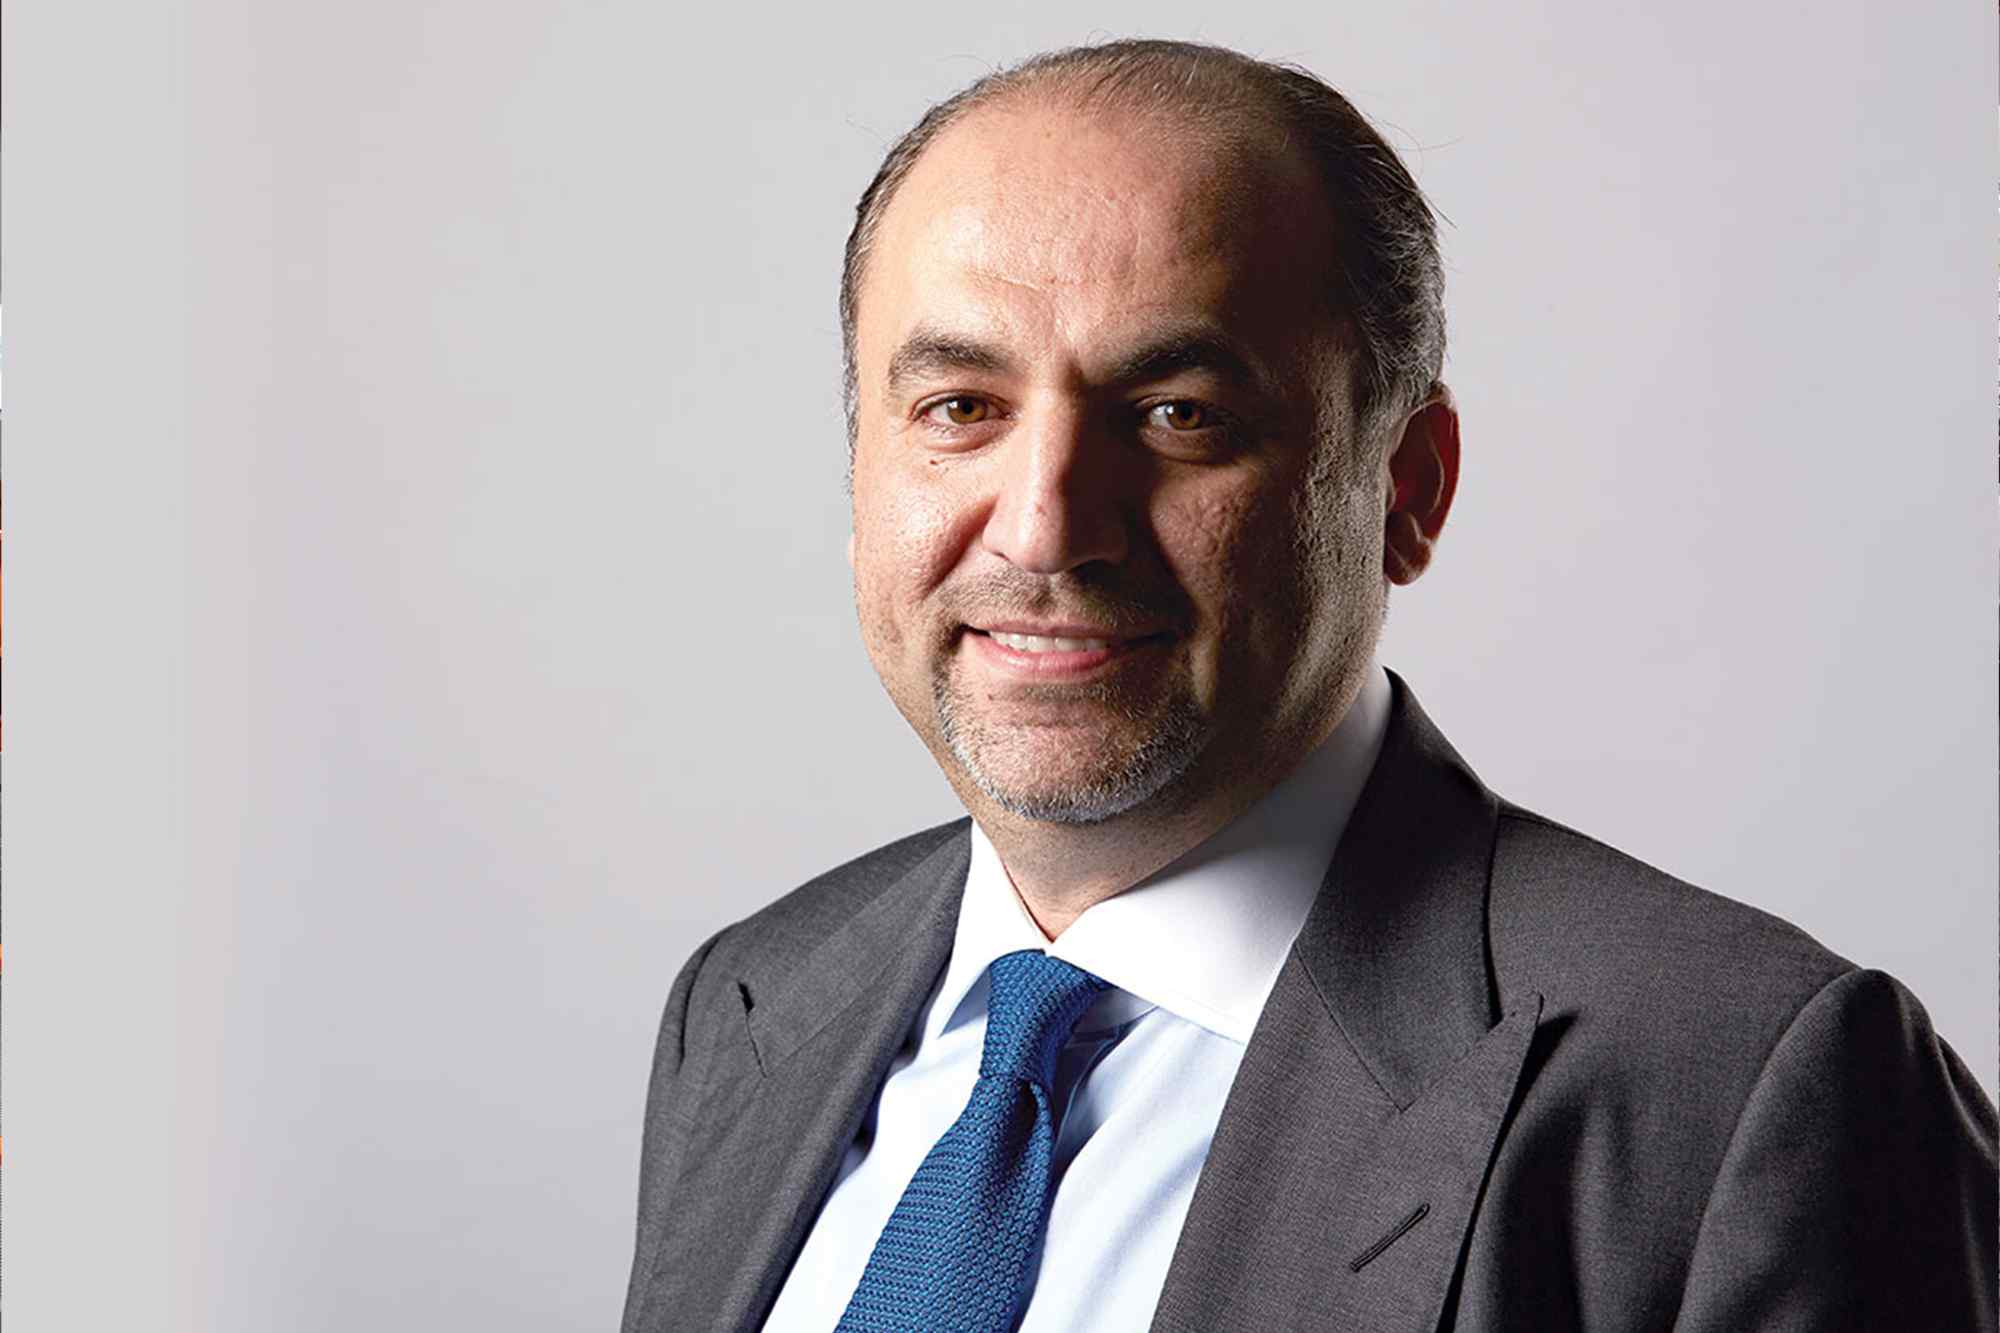 ‘I believe that to change the future, one has to be the future’ – Fadi Amoudi, CEO of IQ Fulfillment